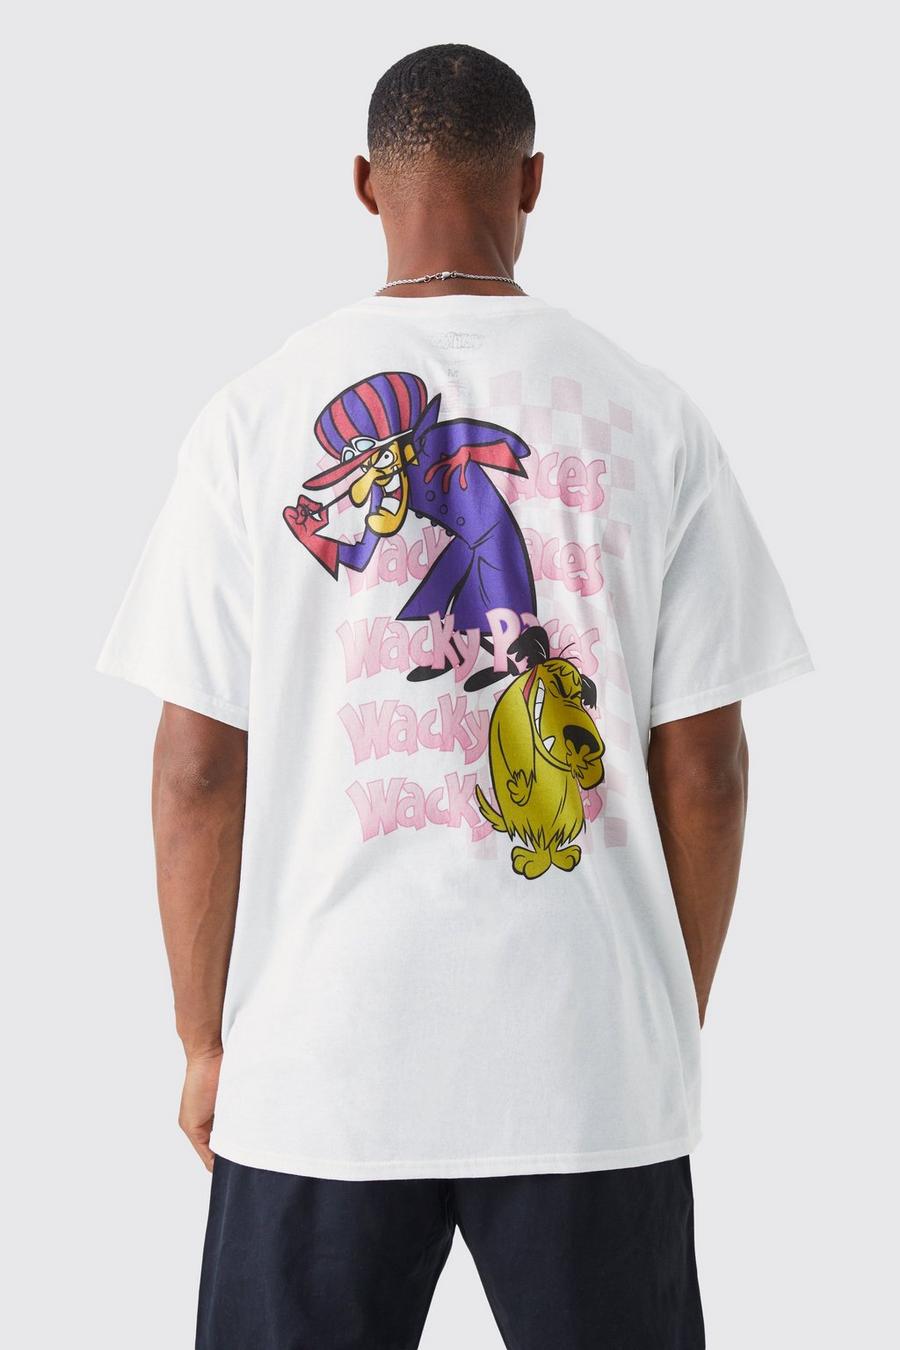 T-shirt oversize ufficiale Whacky Races, White